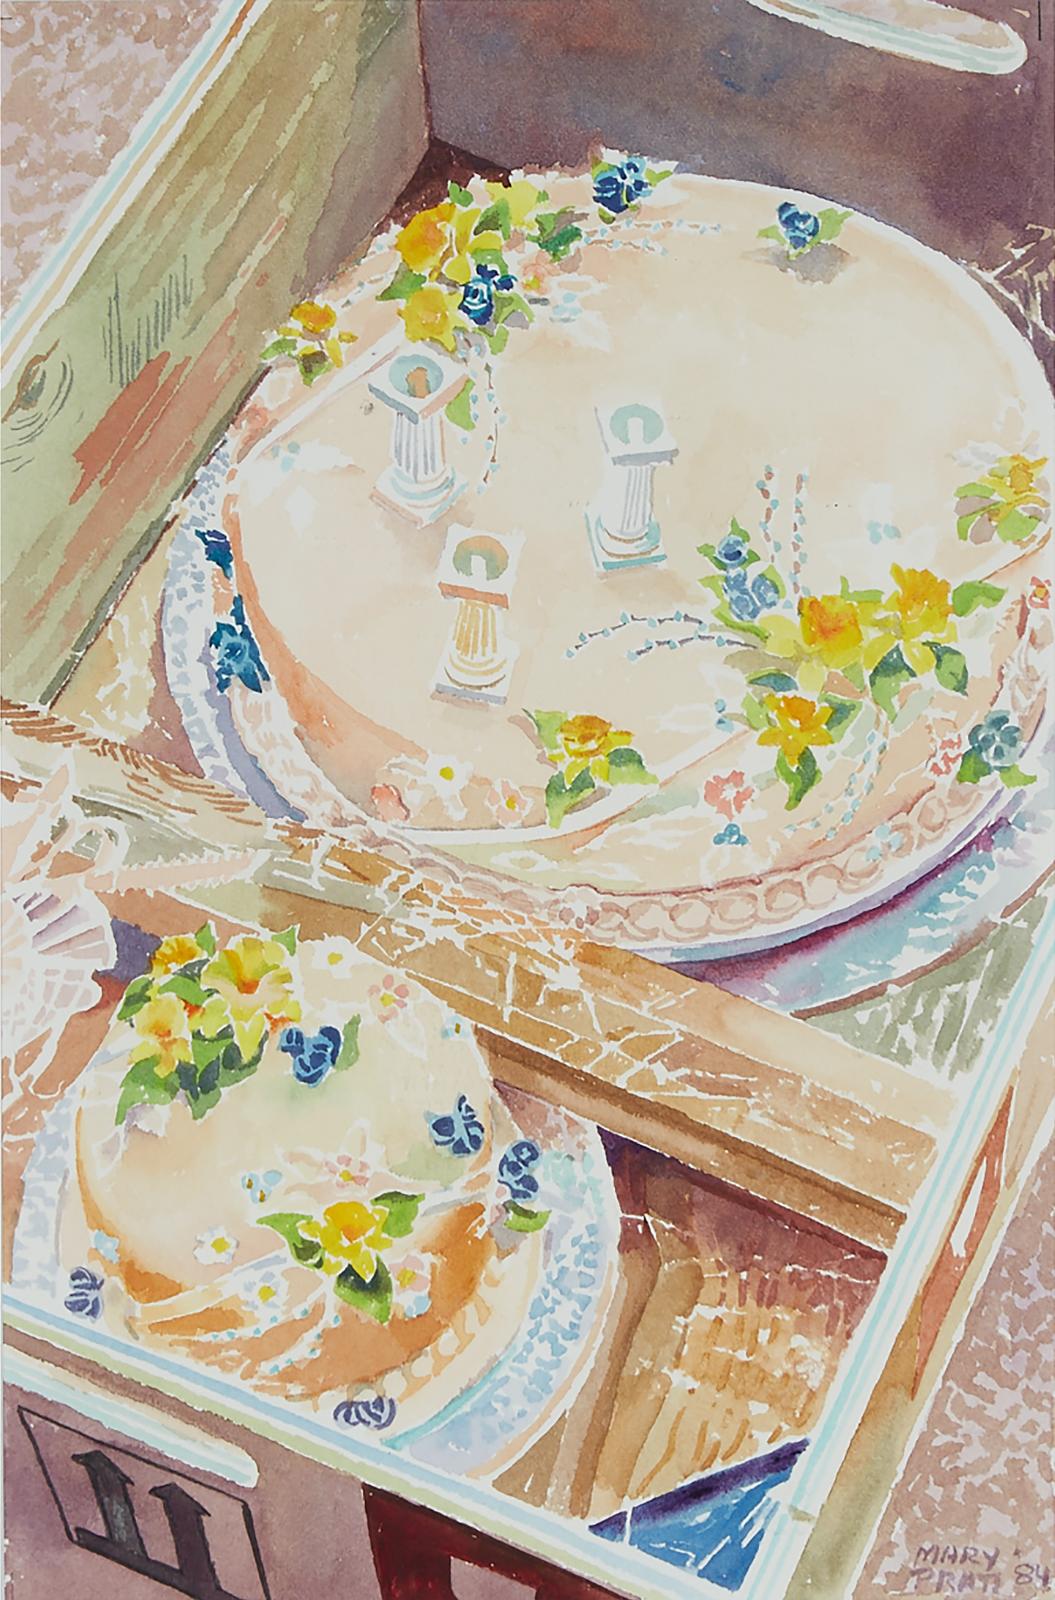 Mary Frances West Pratt (1935-2018) - Cake From Jeanette Mccall's, 1984